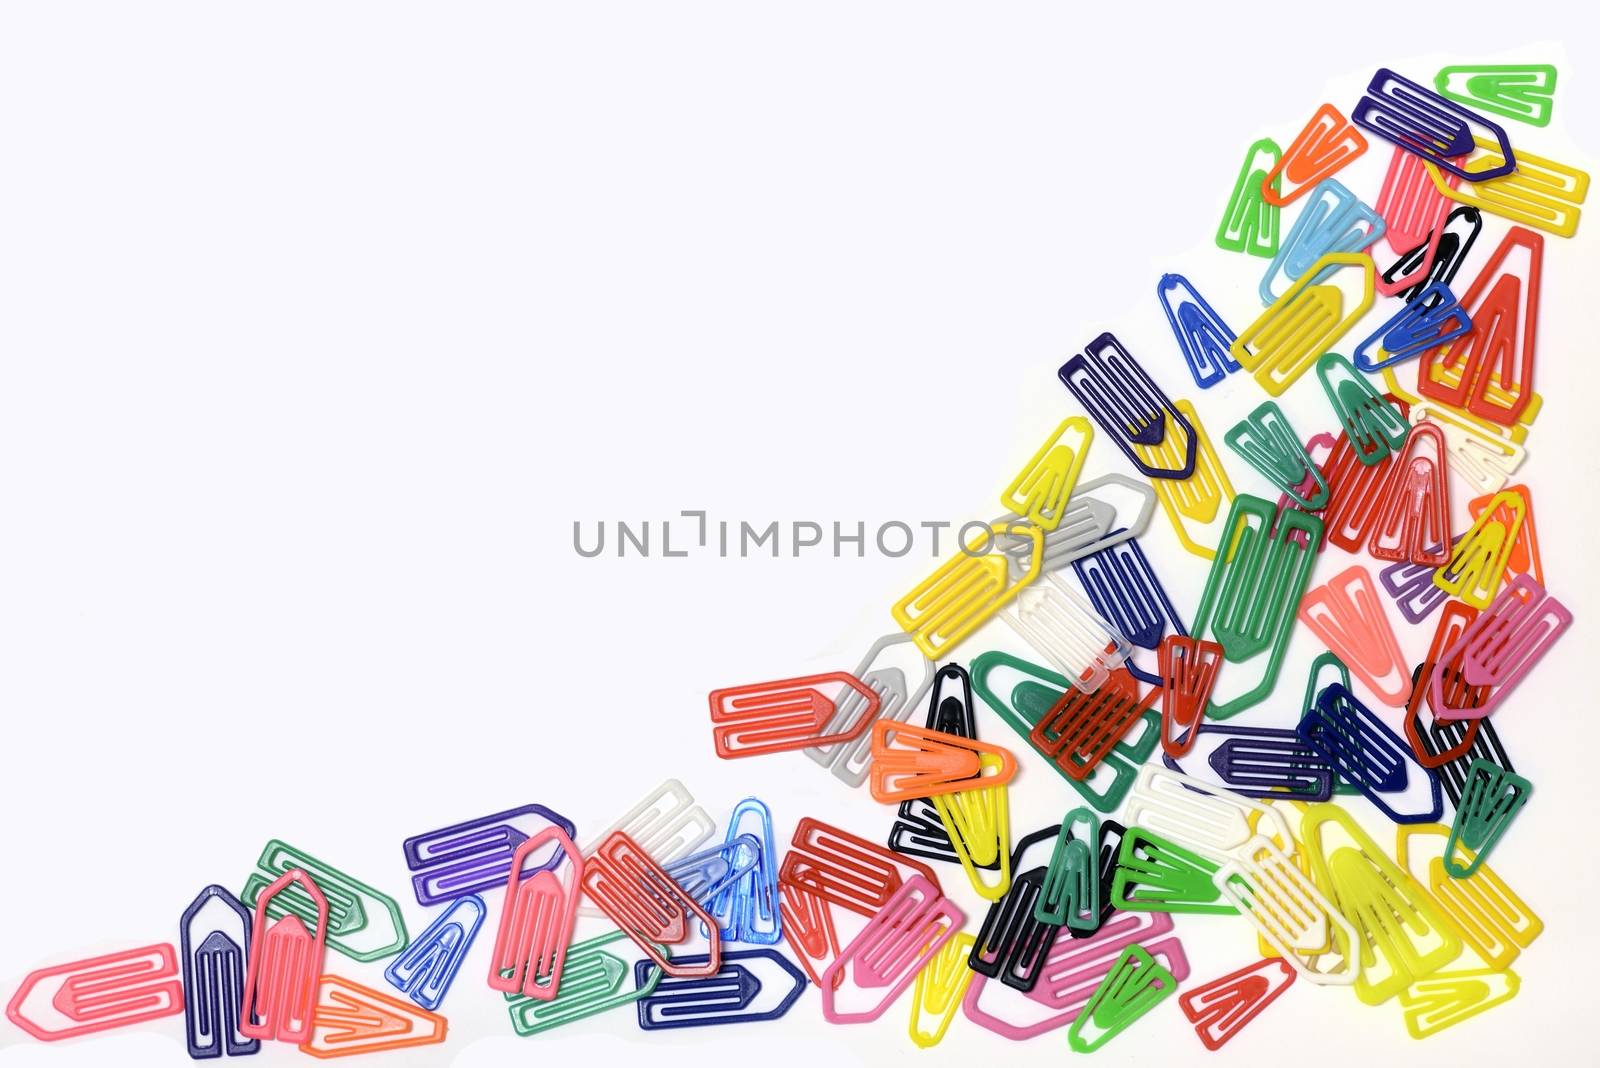 Close-up of multi-colored paper clips on a white background.